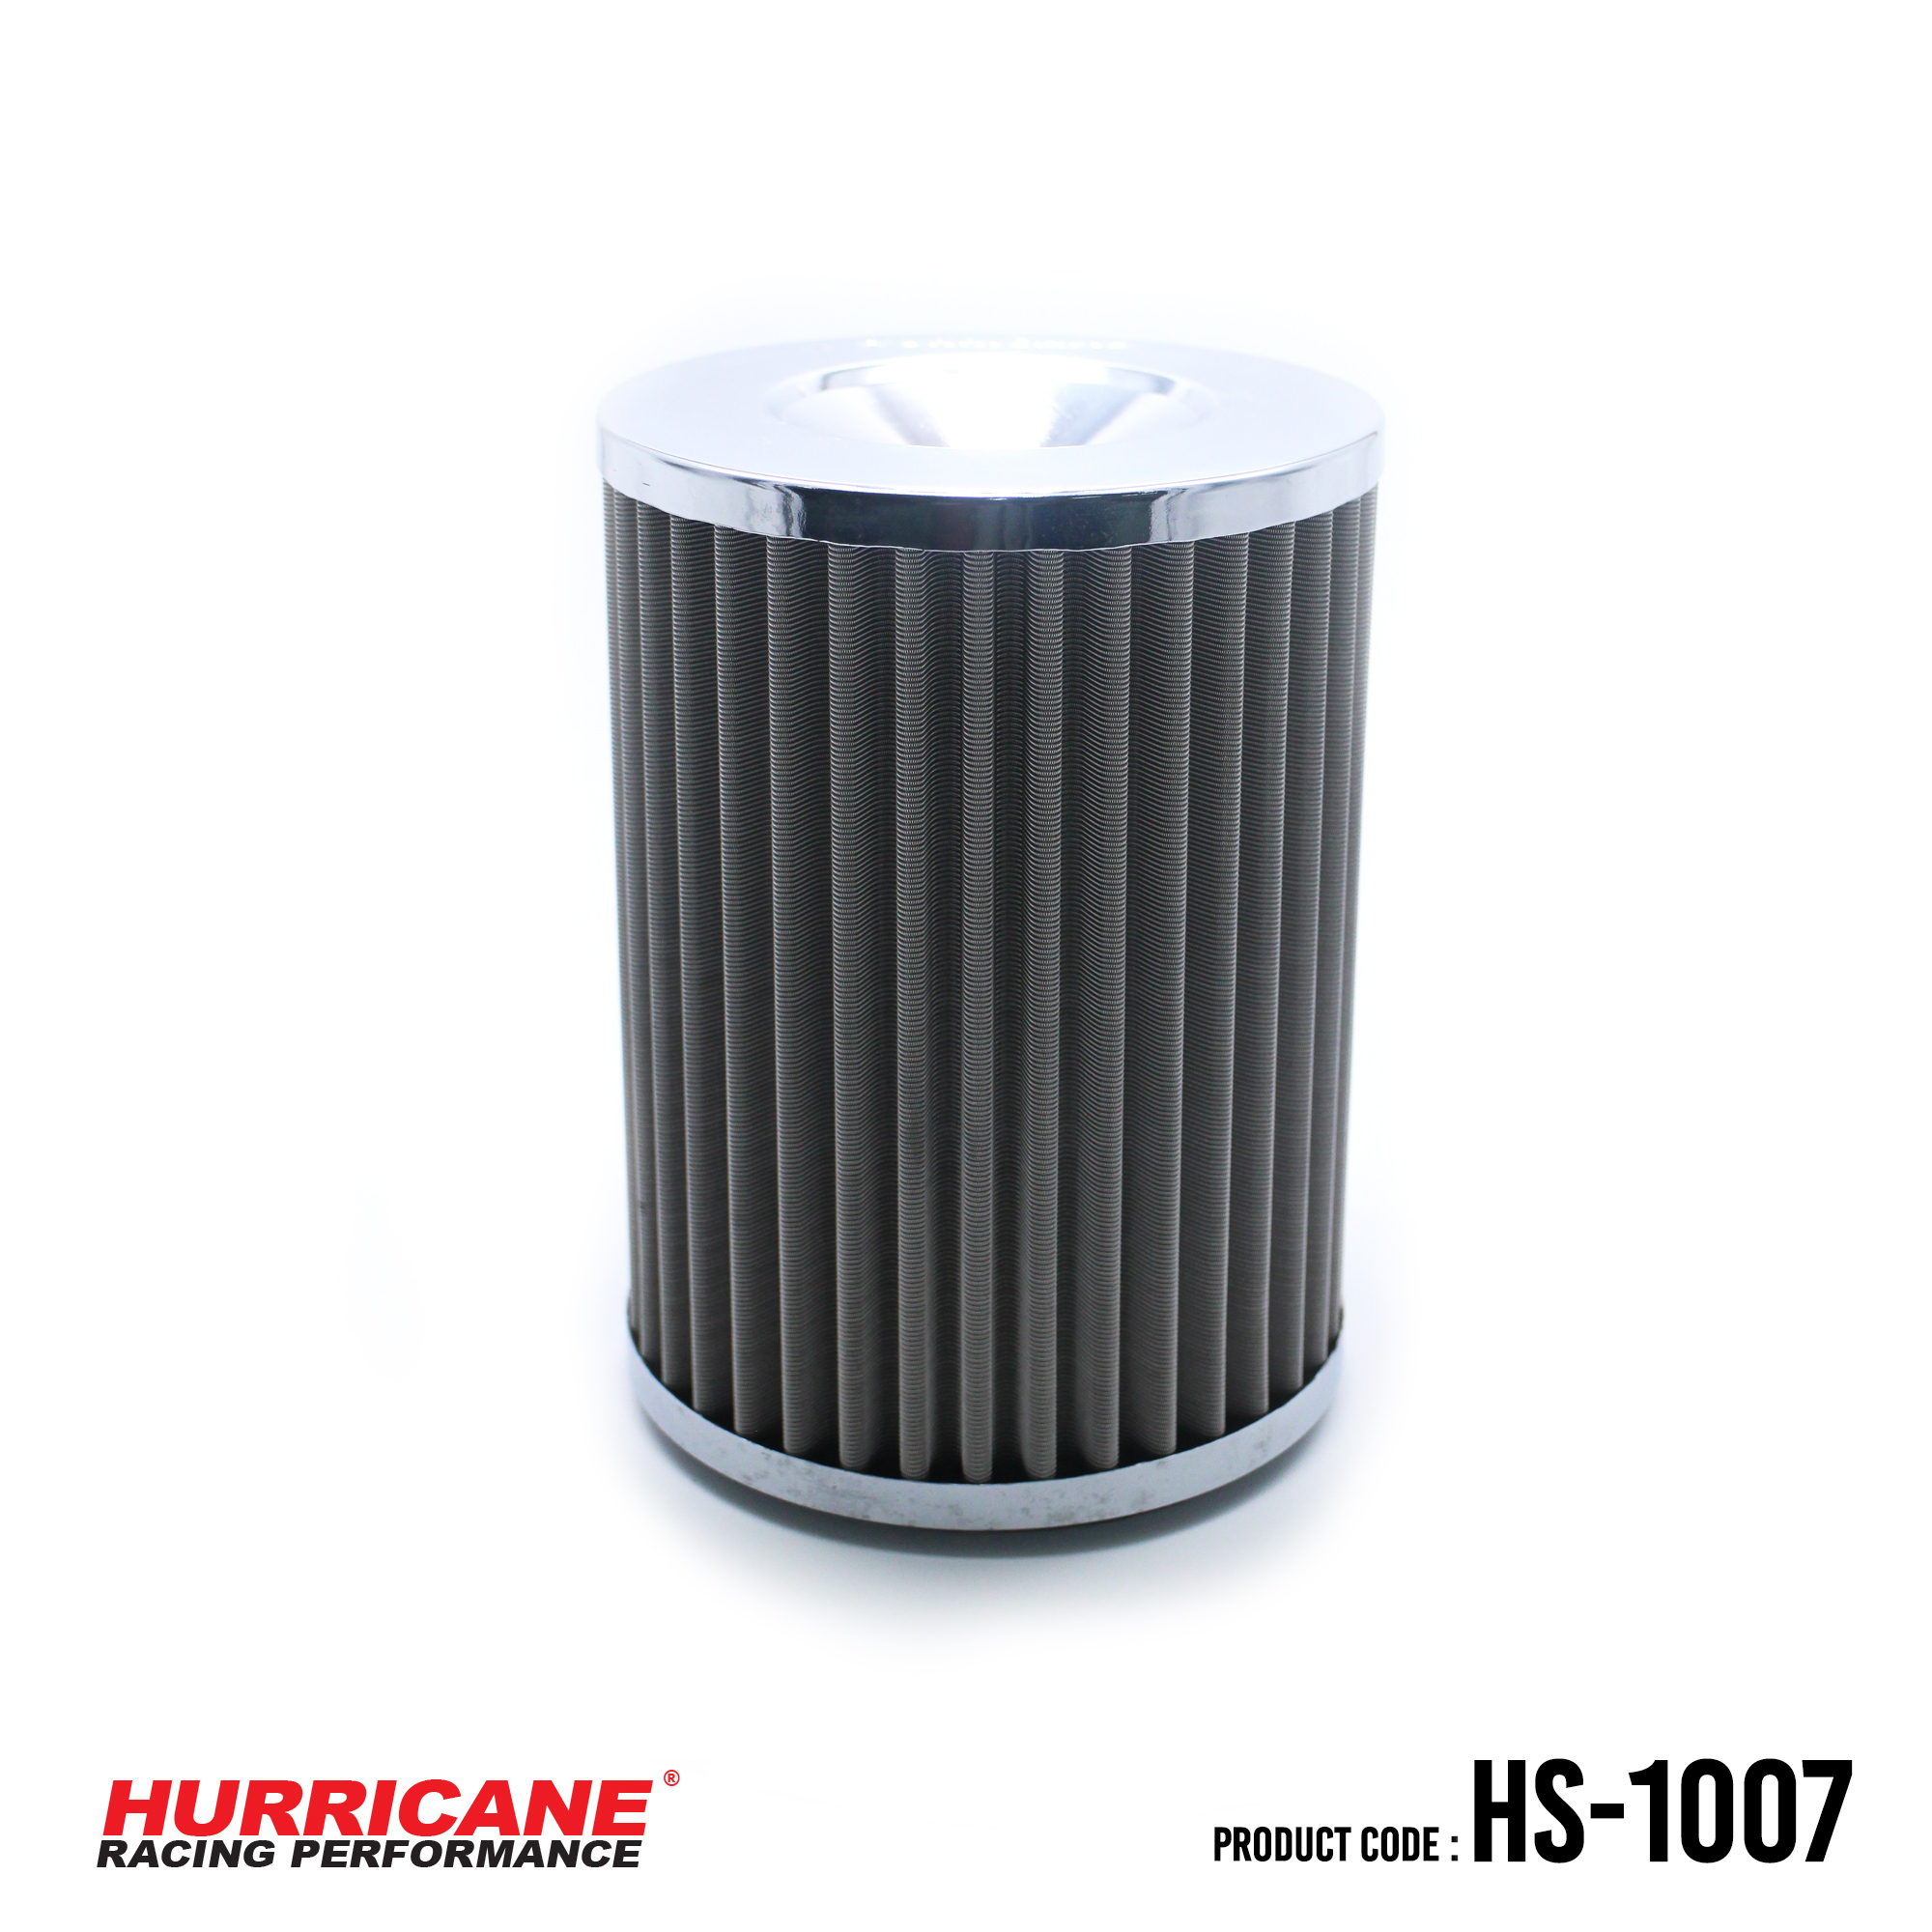 HURRICANE STAINLESS STEEL AIR FILTER FOR HS-1007 Nissan